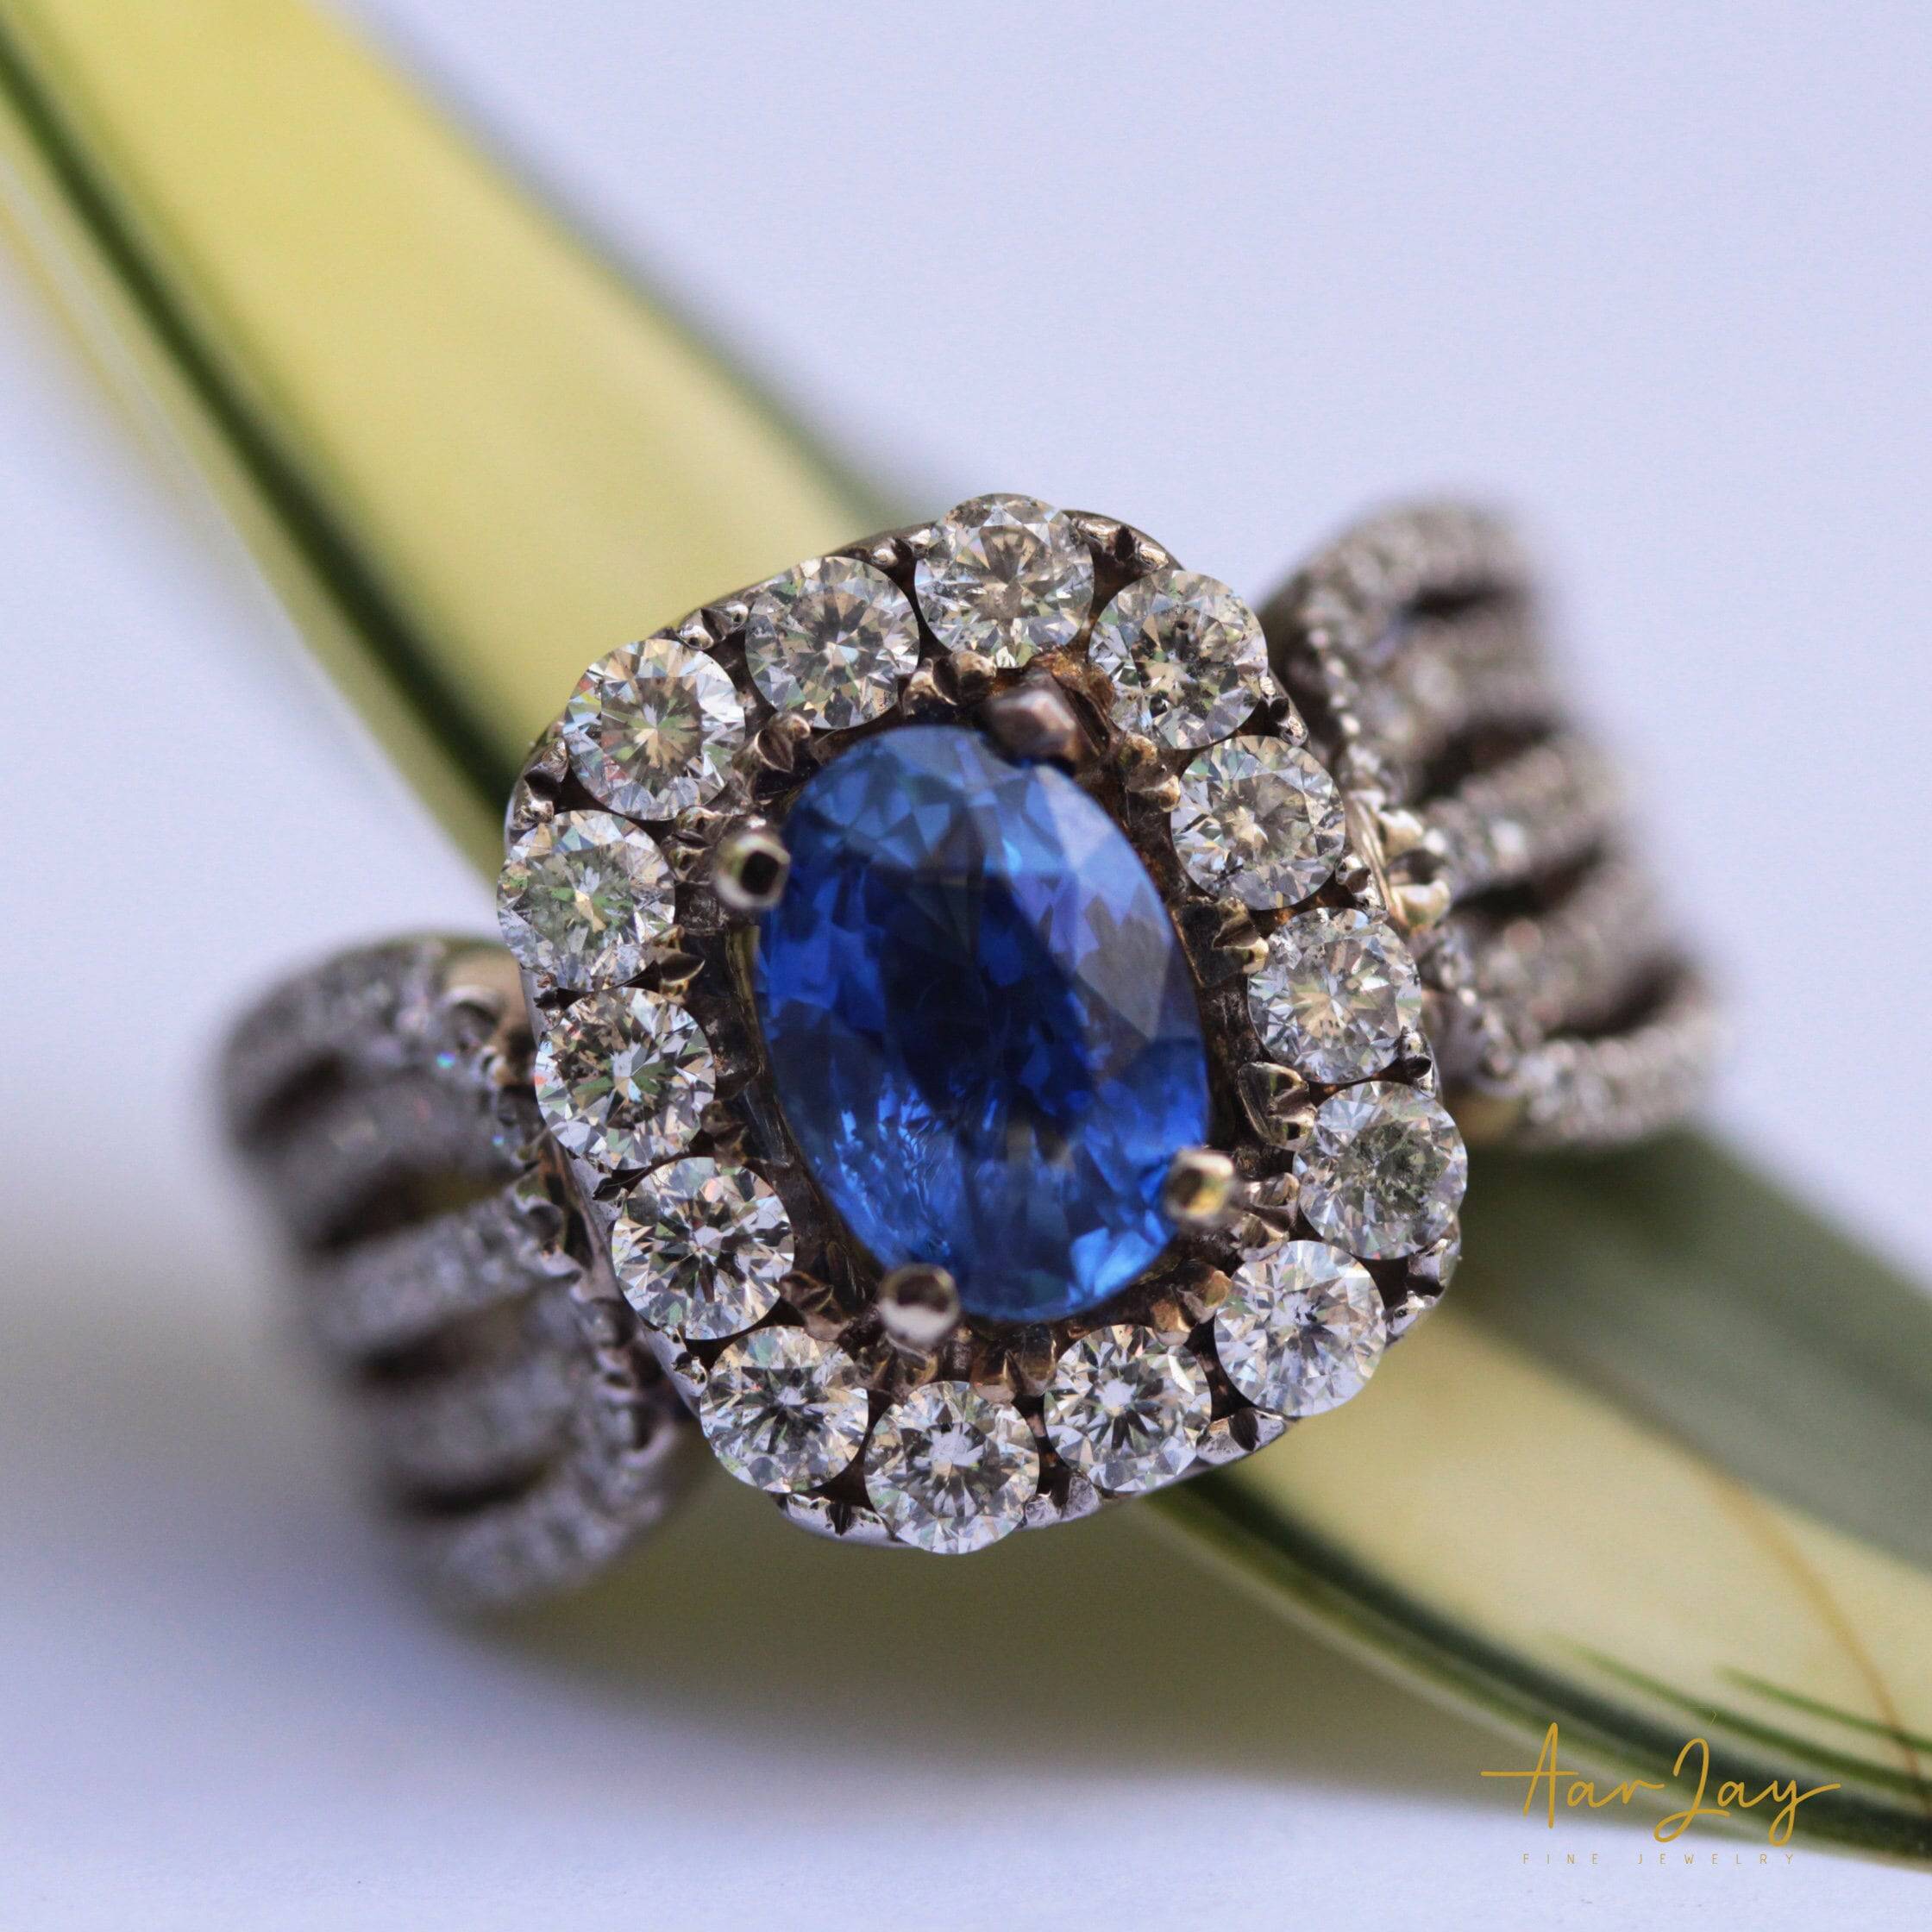 2.50 Cts Blue Sapphire Natural Diamonds in 14Kt White Gold Ring - (H) - Baza Boutique 